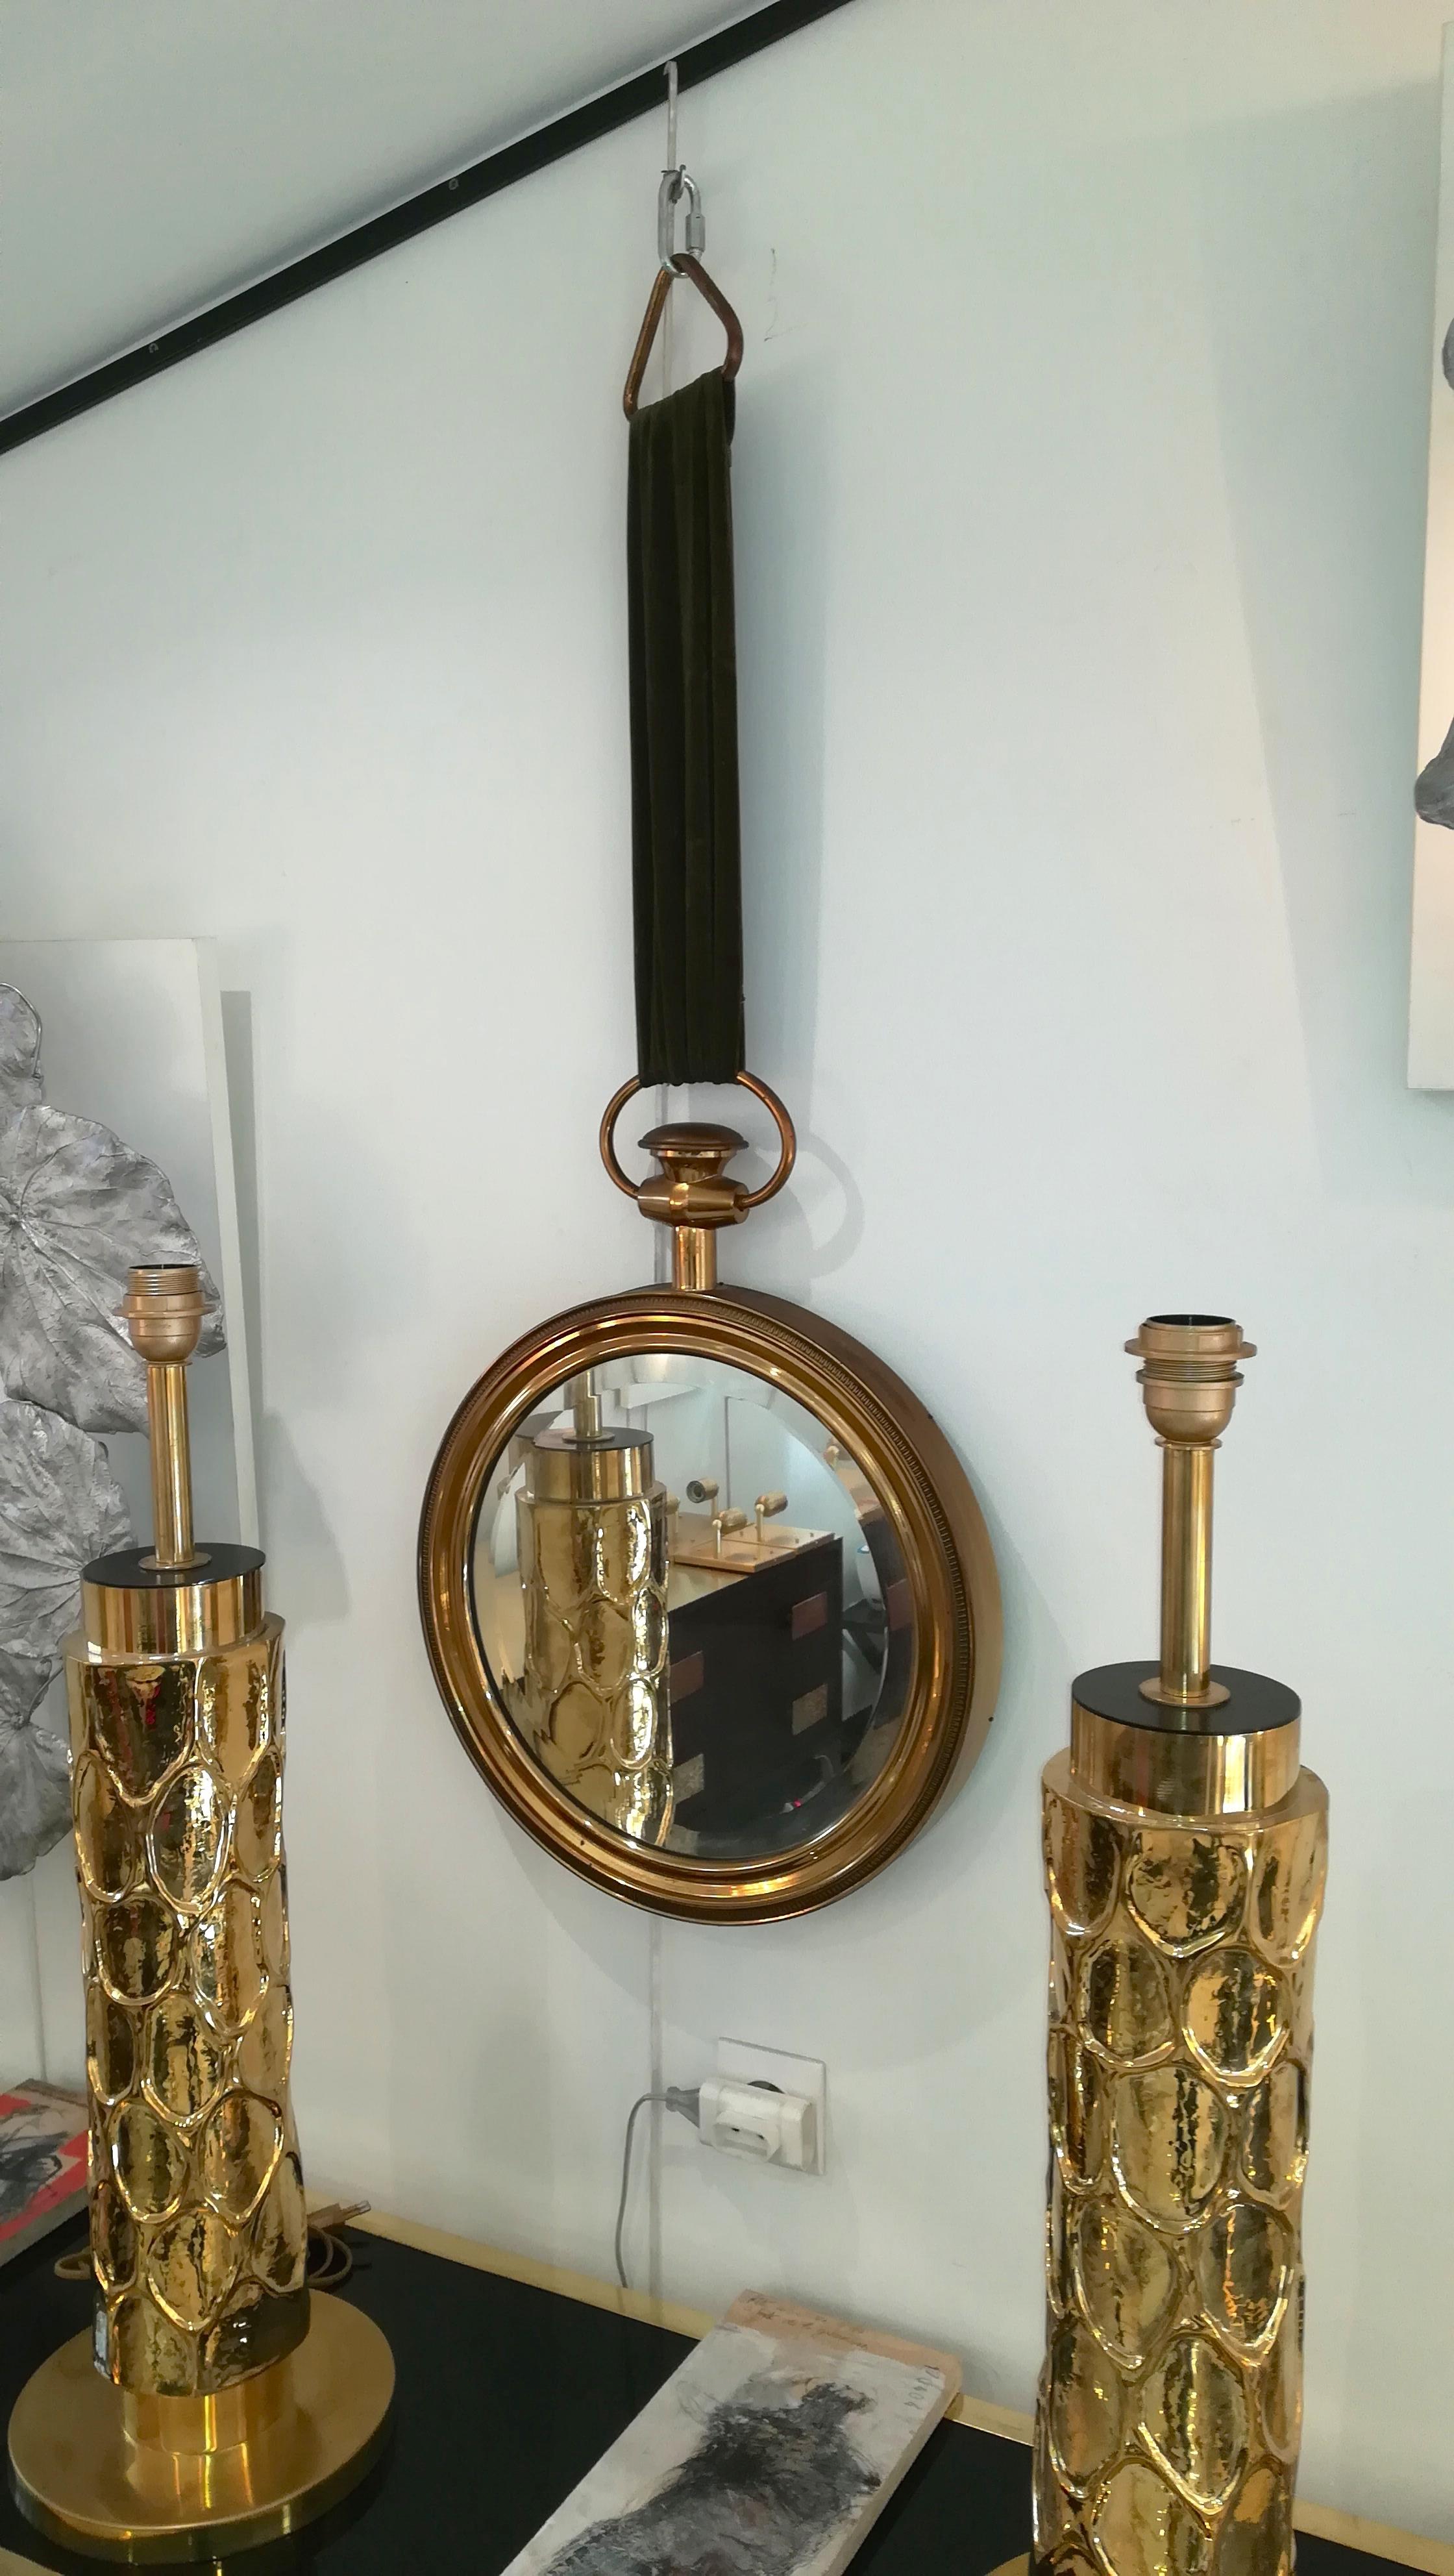 Round wall mirror by Piero Fornasetti in a profiled brass frame
(looking like a pocket watch). The mirror is bevelled all around
The mirror hangs down from a green velvet ribbon with a brass triangle.
Very good condition.